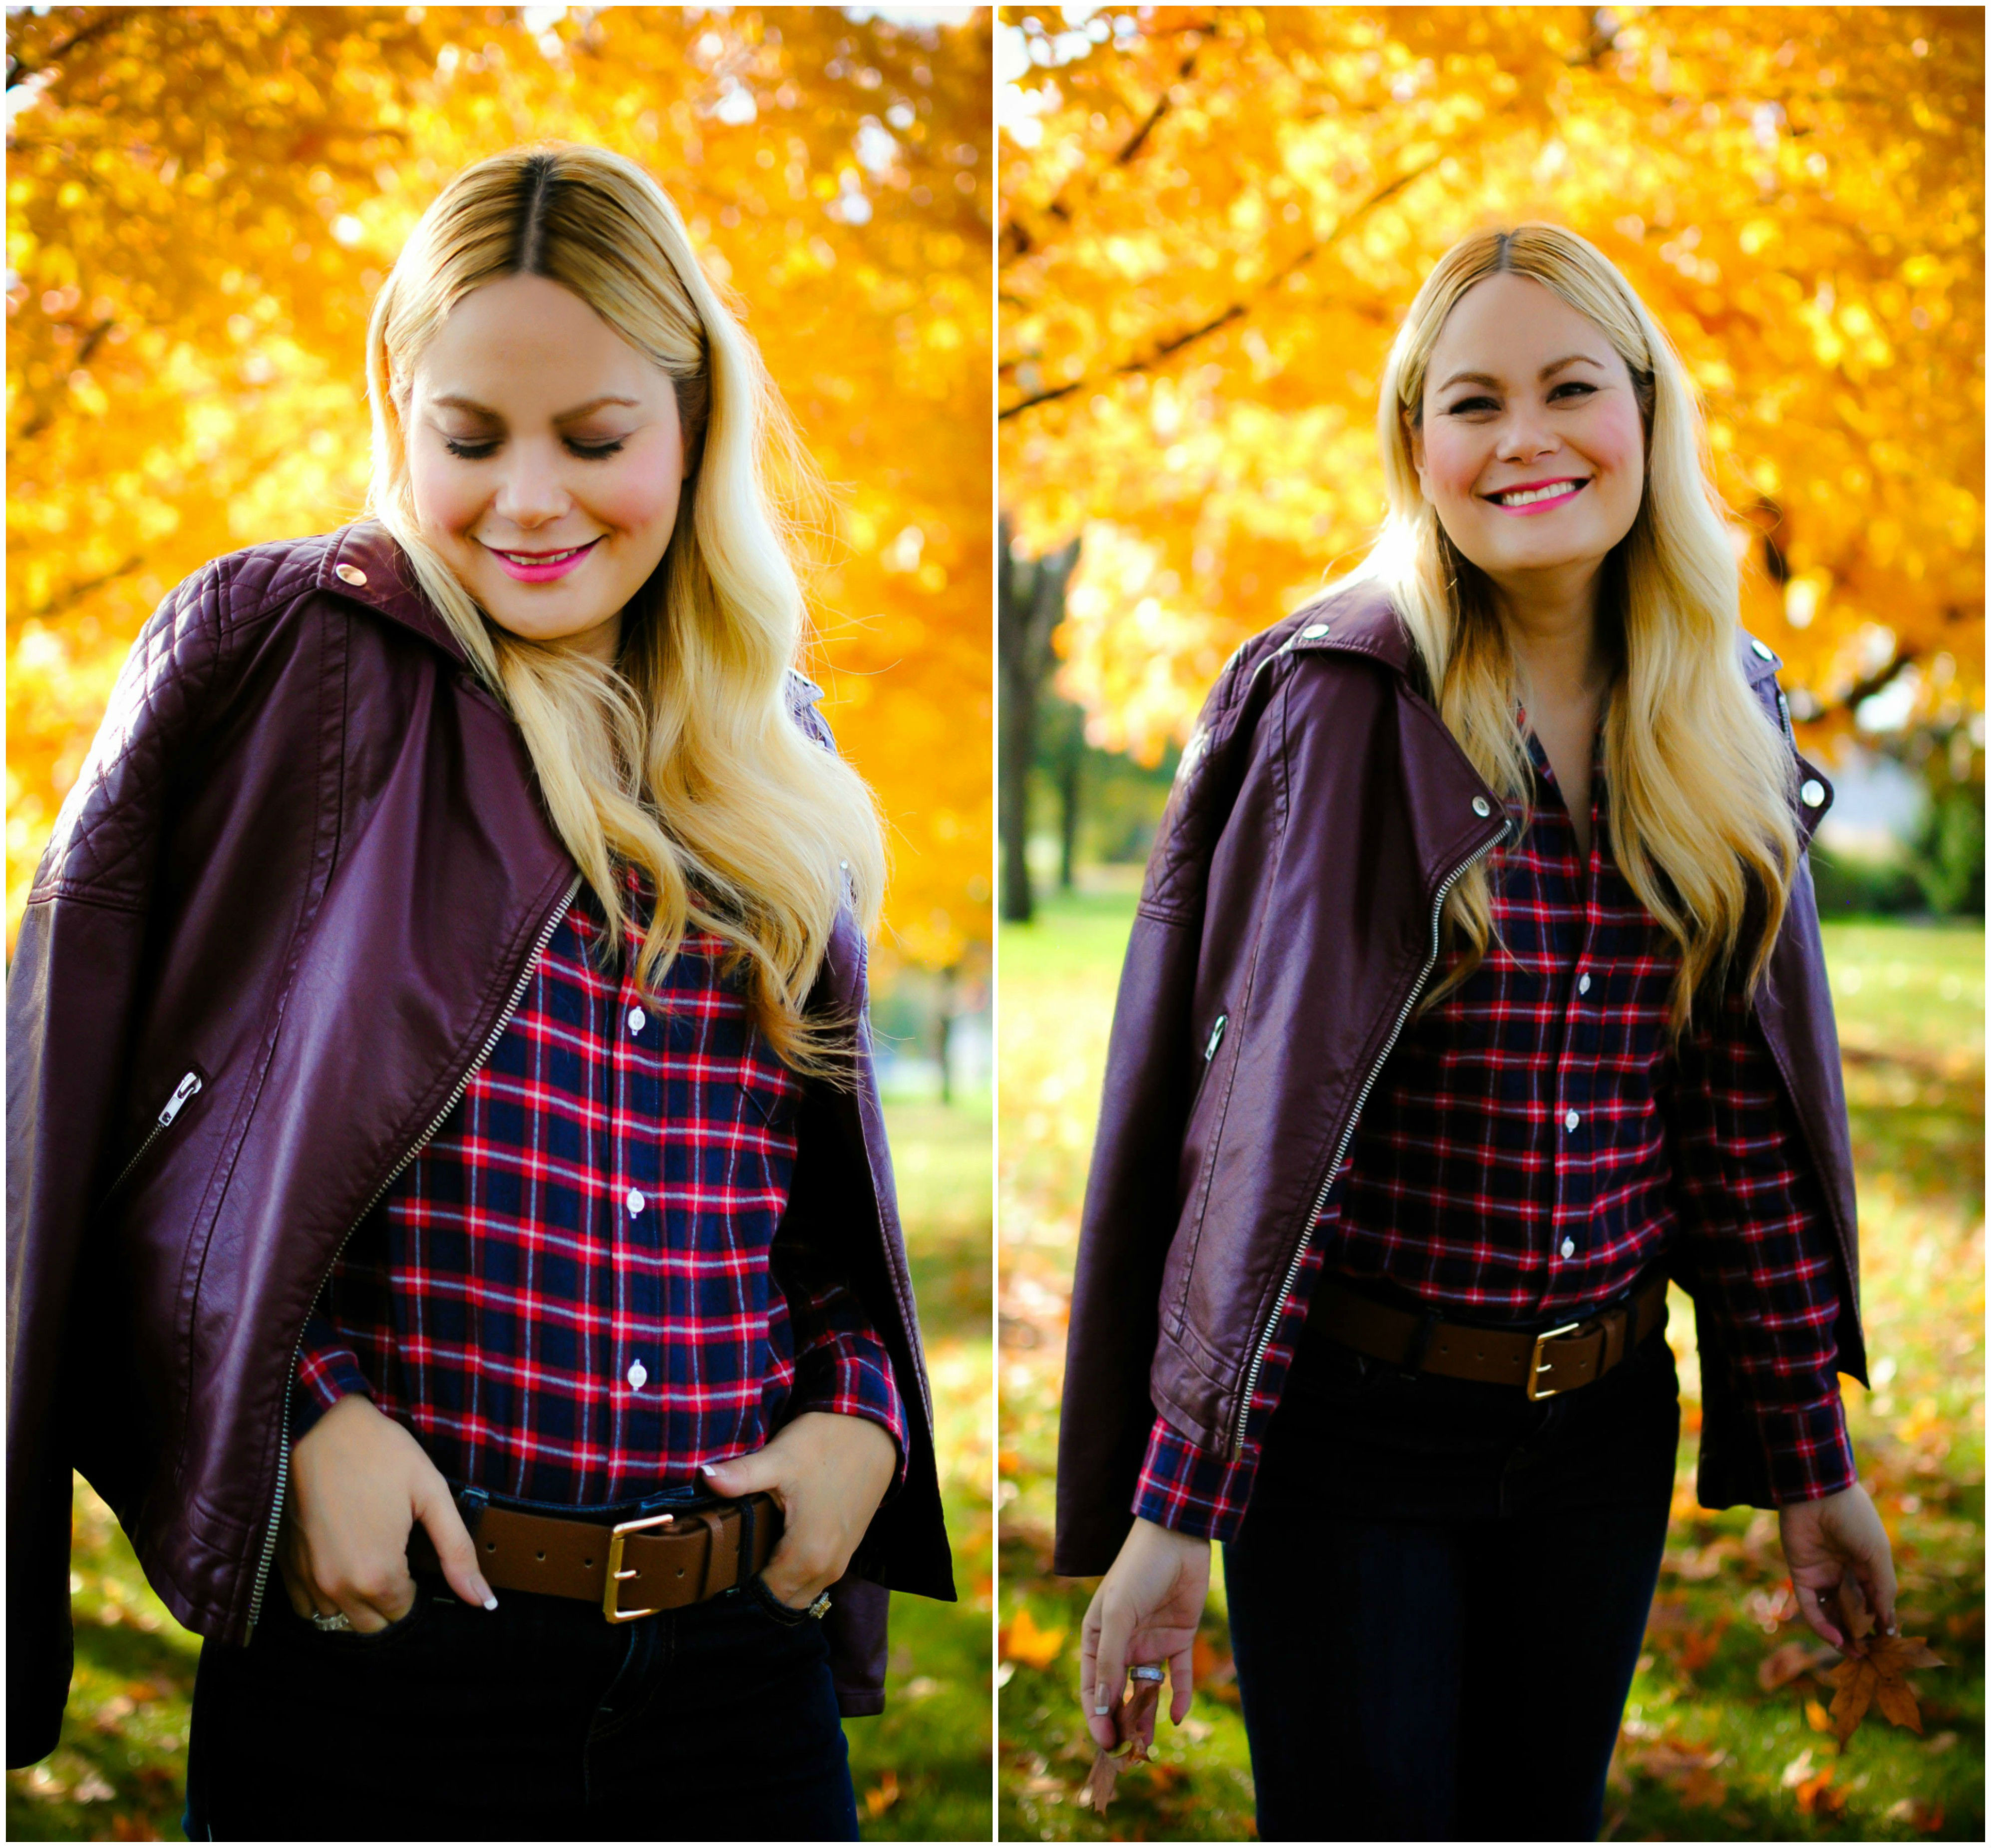 vanessa-lambert-blogger-behind-what-would-v-wear-wears-a-plaid-shirt-for-fall-paired-with-jeans-and-a-burgundy-colored-moto-jacket_2